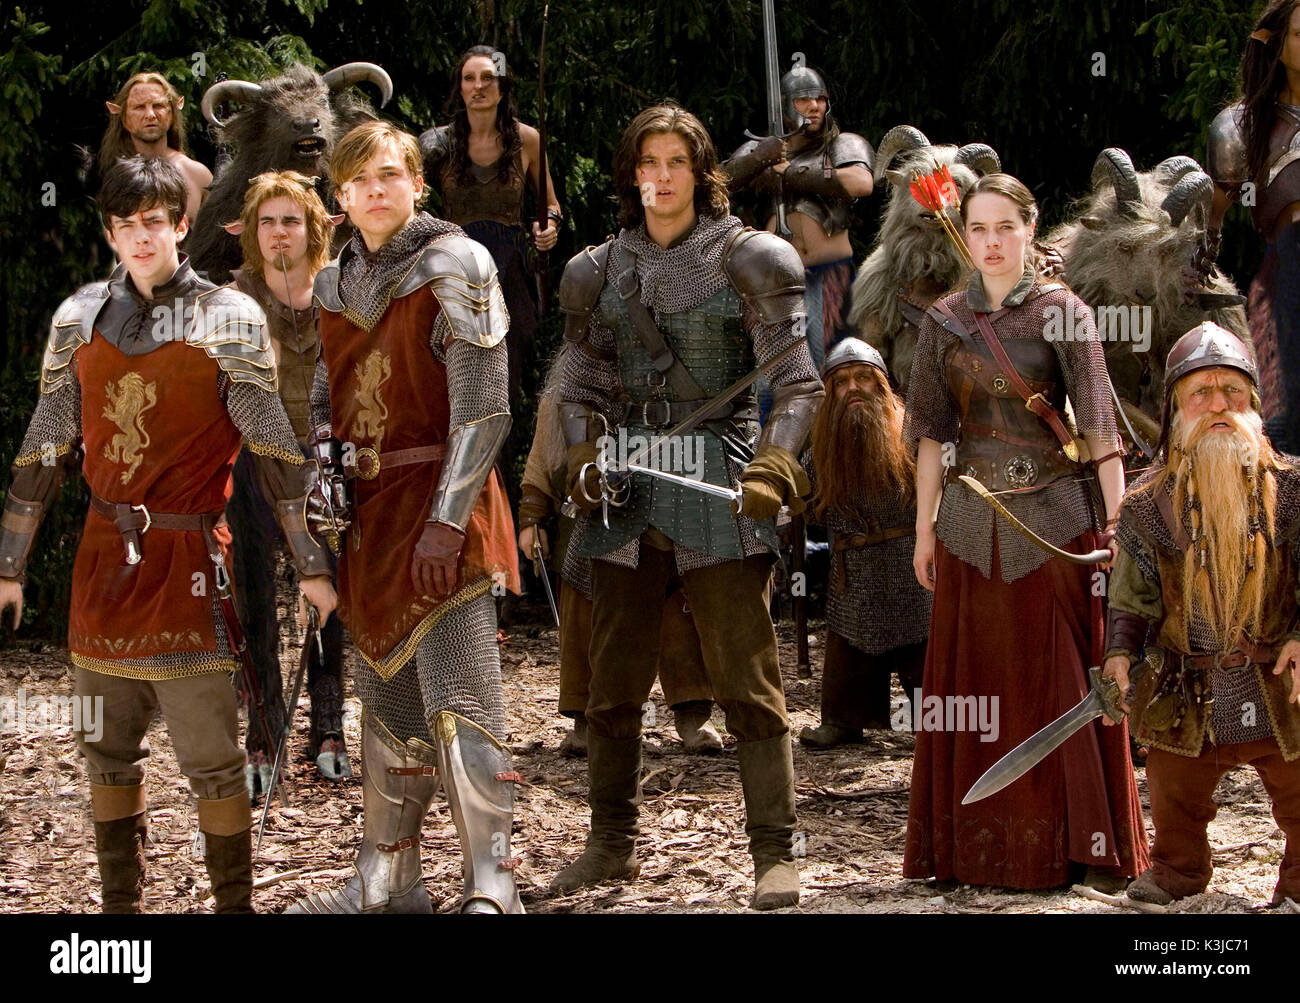 THE CHRONICLES OF NARNIA: PRINCE CASPIAN [BR / US 2008] It's 1,300 years later, and Prince Caspian (BEN BARNES, center) must call upon Edmund (SKANDAR KEYNES, far left), Peter (WILLIAM MOSELEY, left), and Susan (ANNA POPPLEWELL, near right) as well as the red dwarf Trumpkin (PETER DINKLAGE, far right) to help battle the pirate-like Telmarines and reclaim the kingdom of Narnia THE CHRONICLES OF NARNIA: PRINCE CASPIAN     Date: 2008 Stock Photo